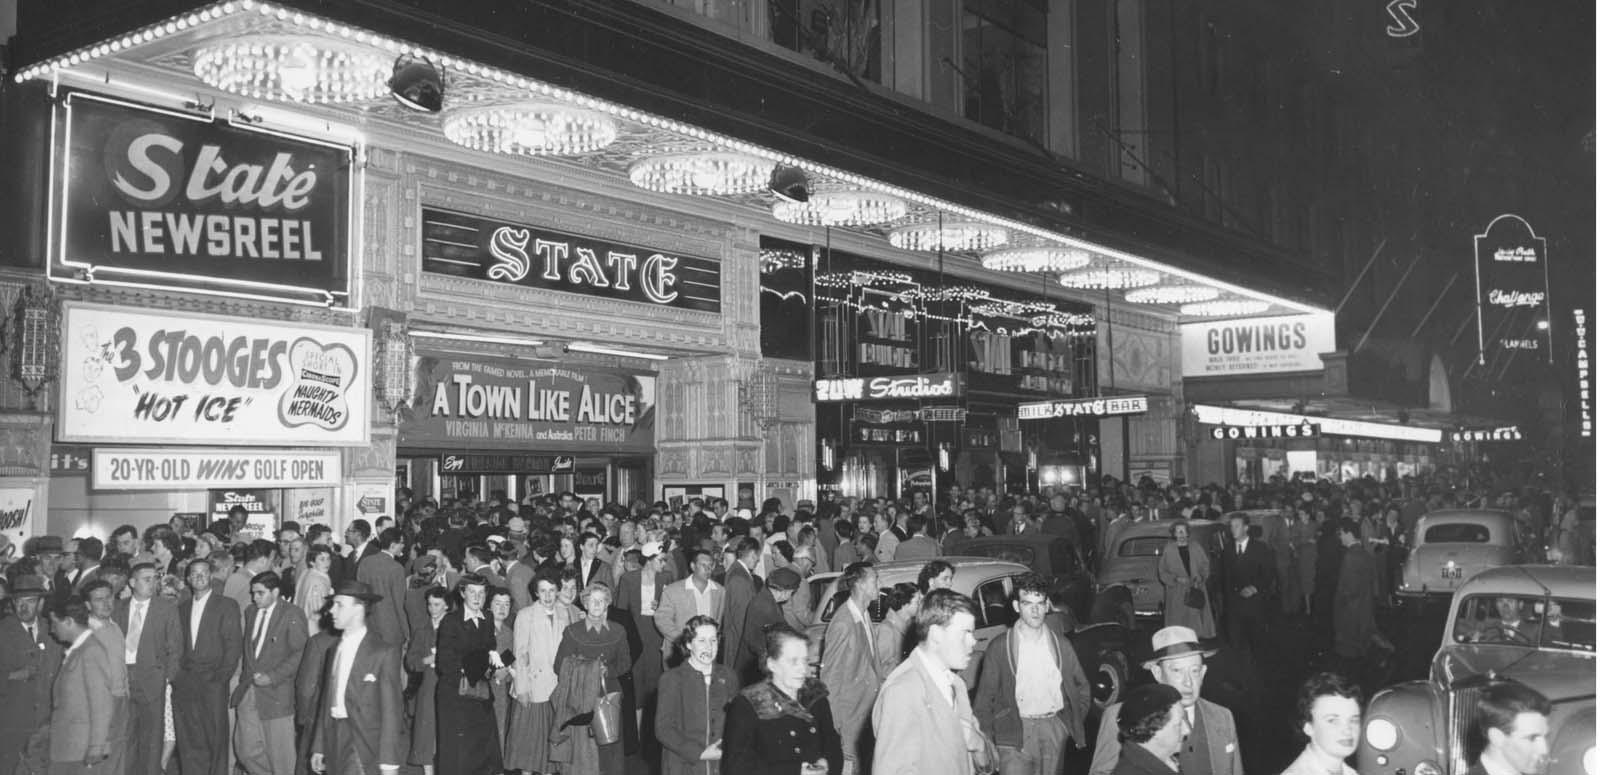 A crowd of patrons in 1950s Sydney outside the State Theatre which is showing A Town Like Alice